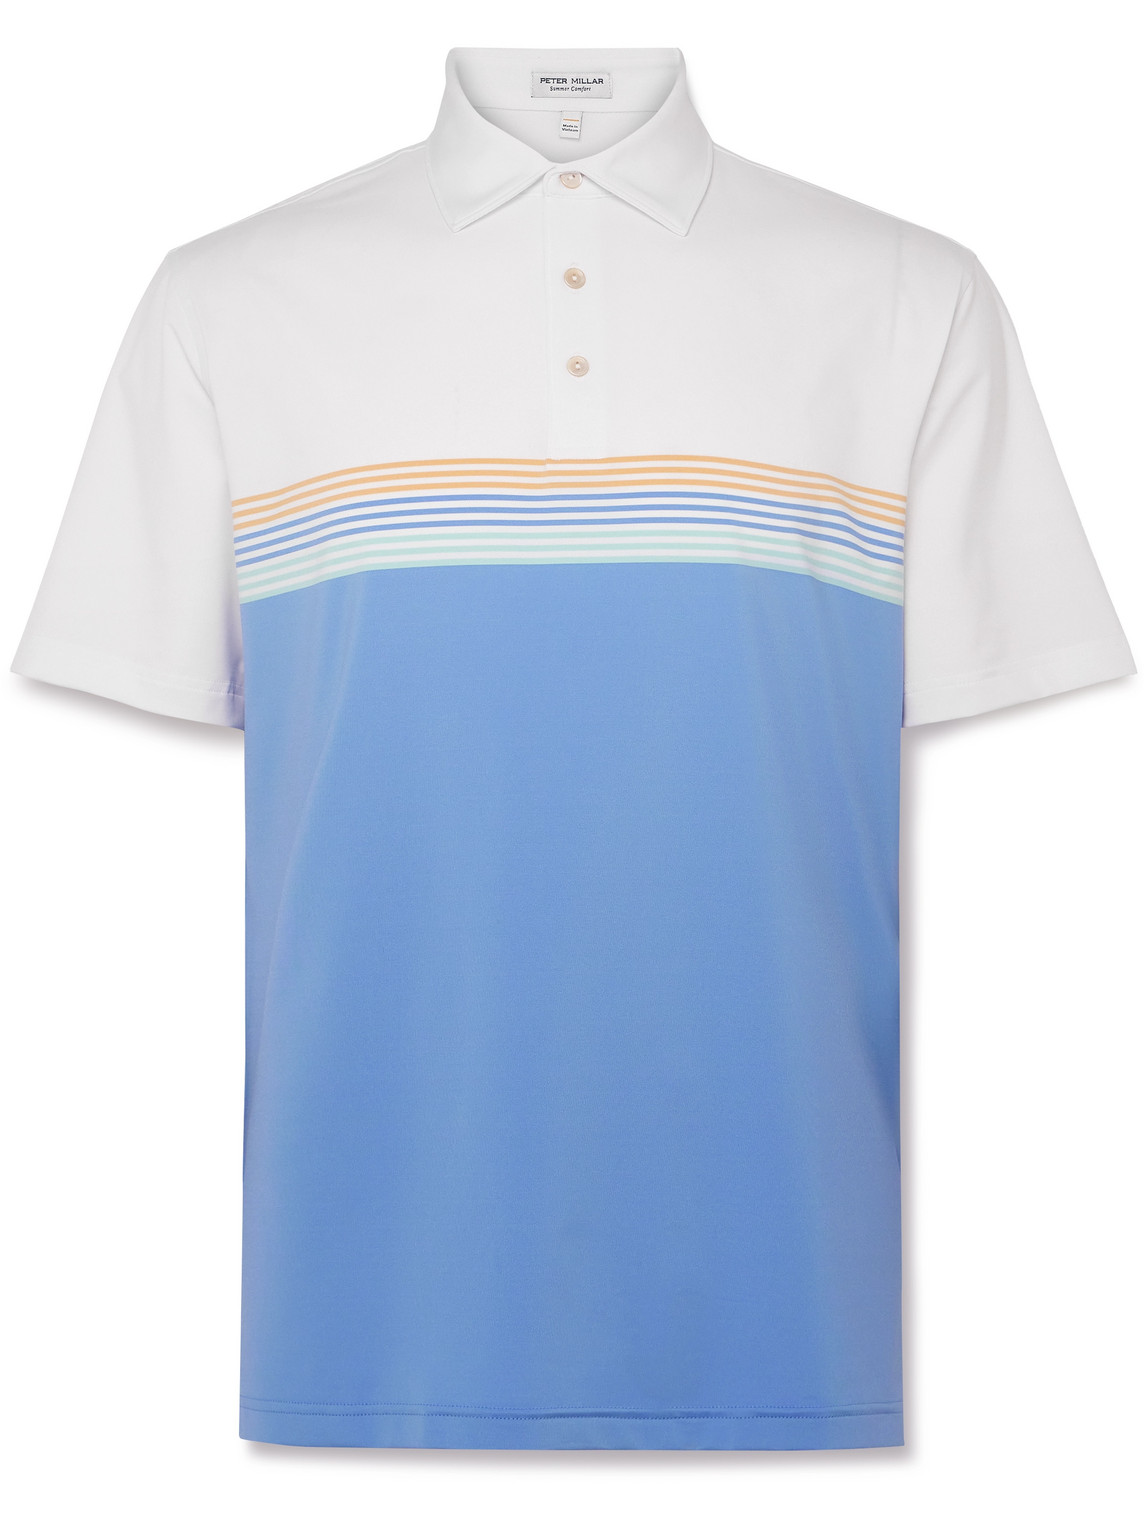 Peter Millar Windham Striped Tech-jersey Golf Polo Shirt In White